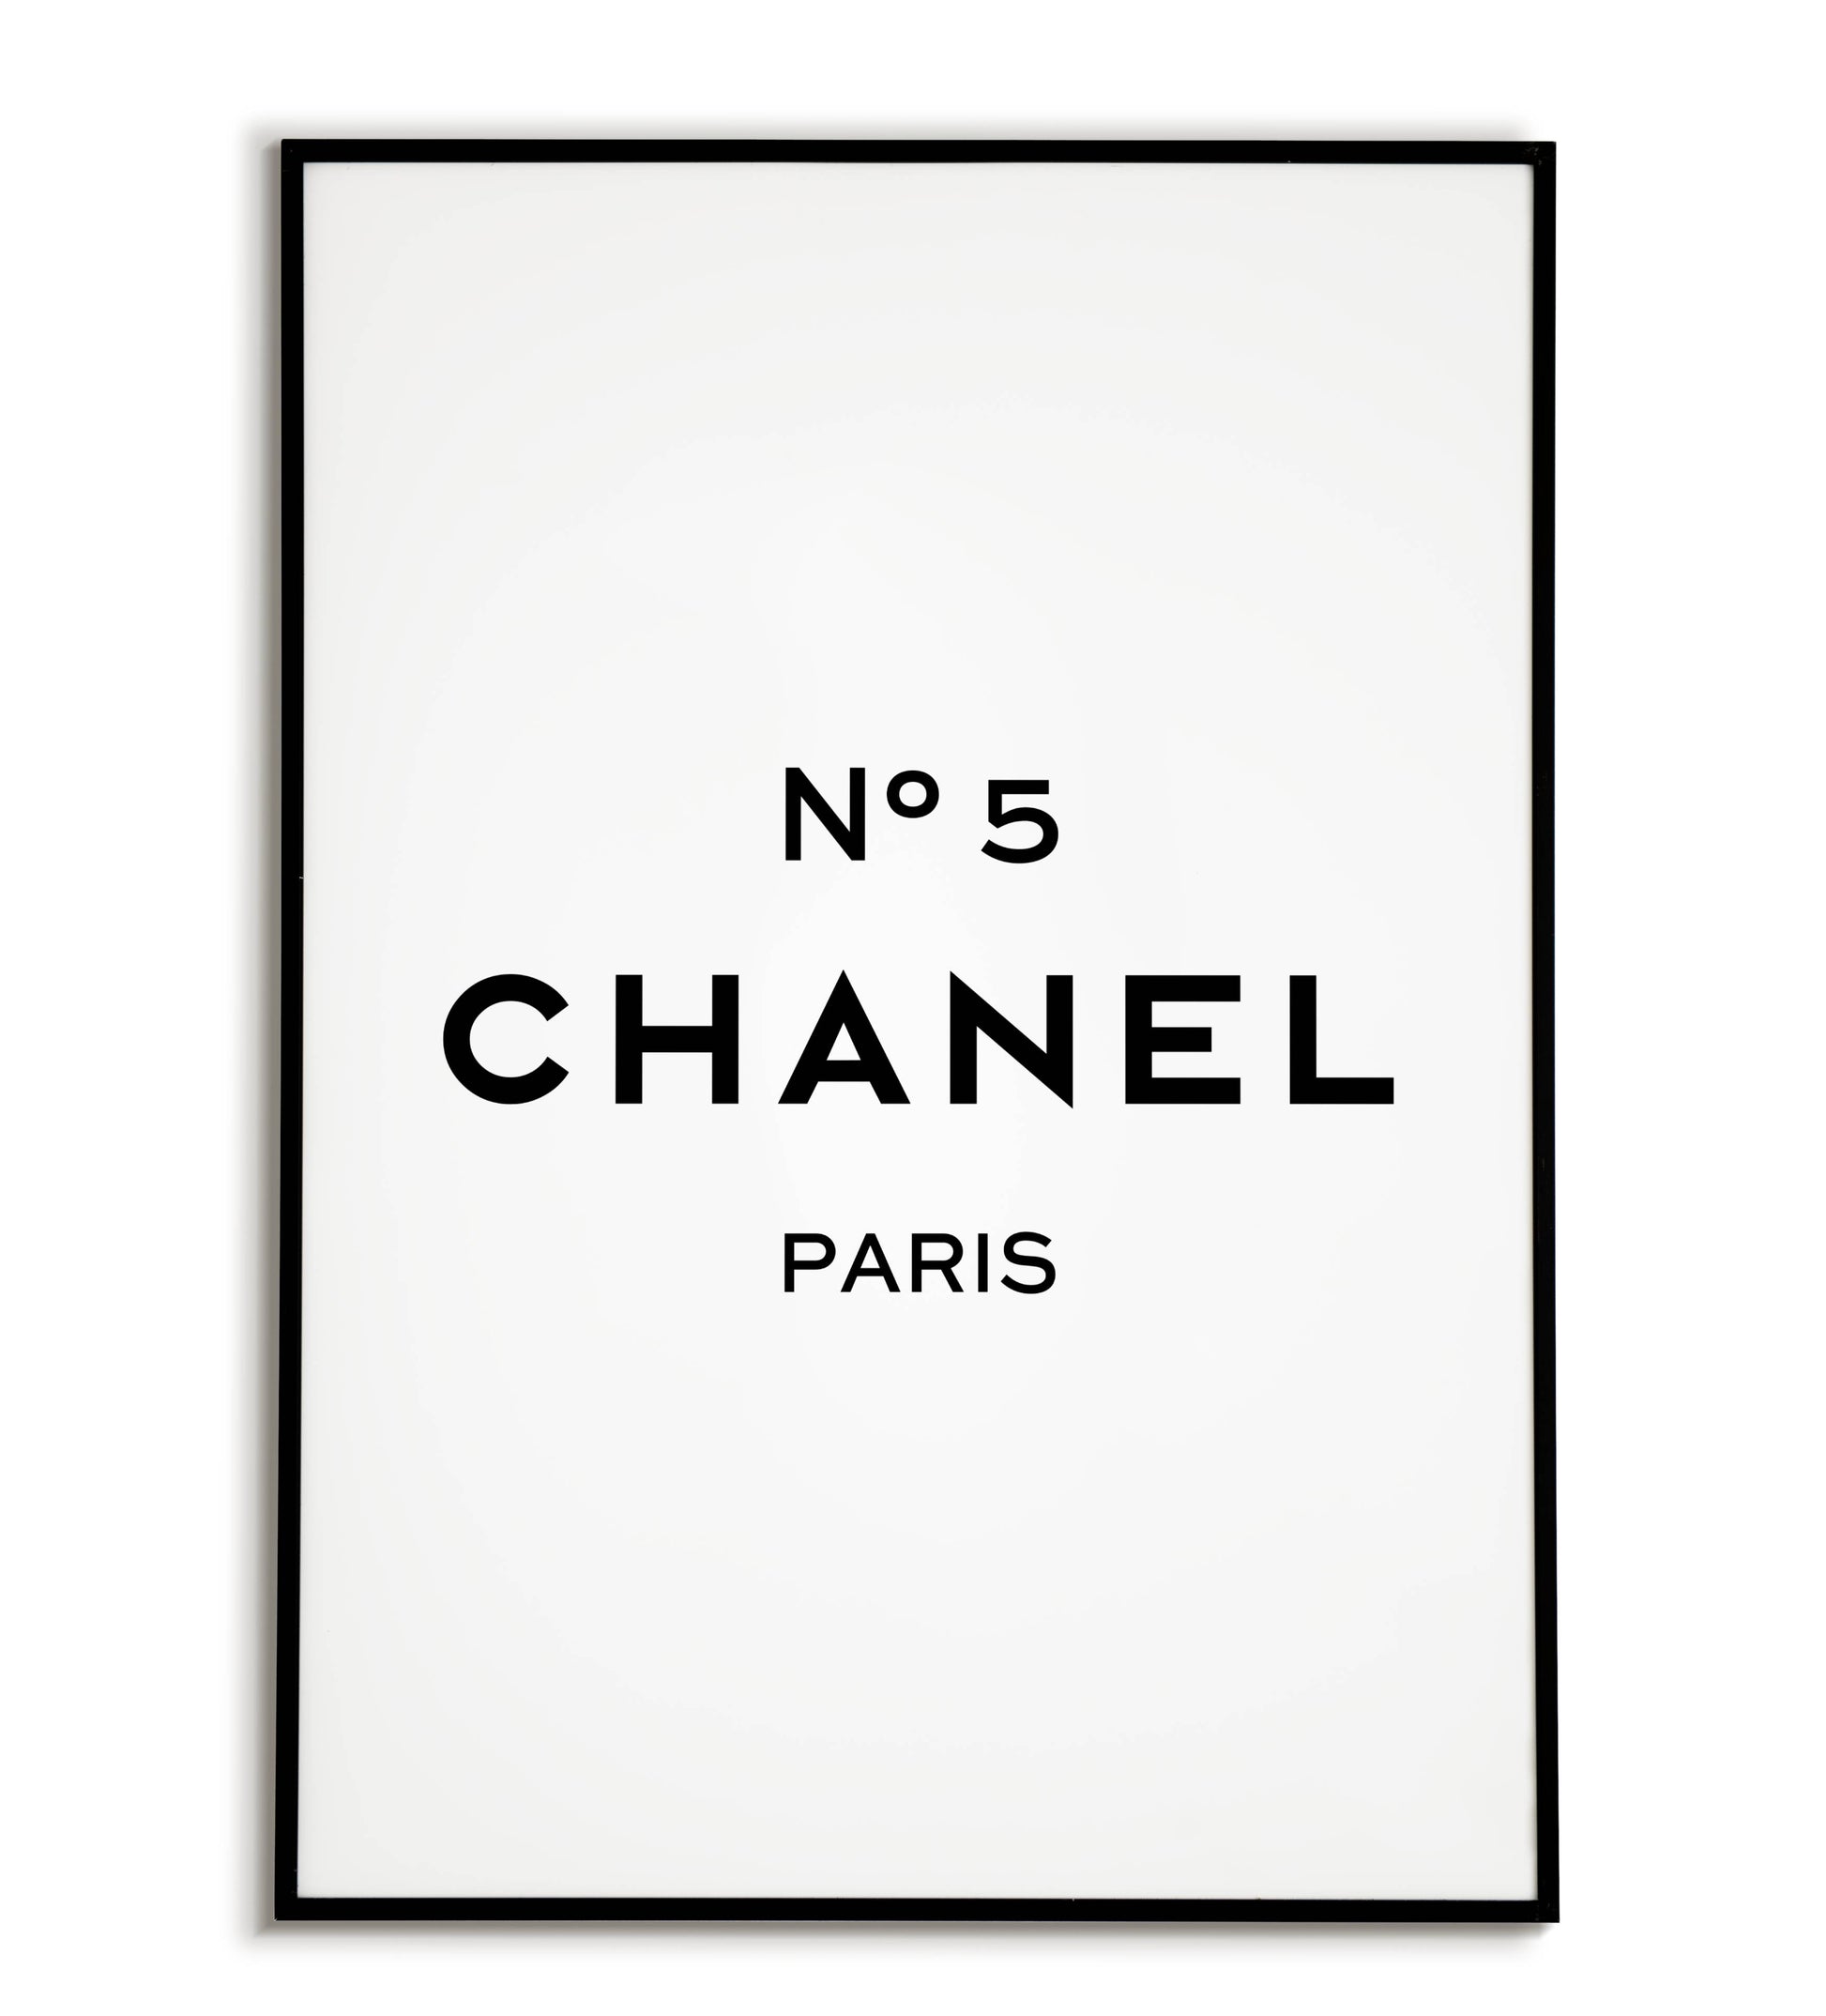 N°5 Chanel Paris printable poster for a touch of luxury.